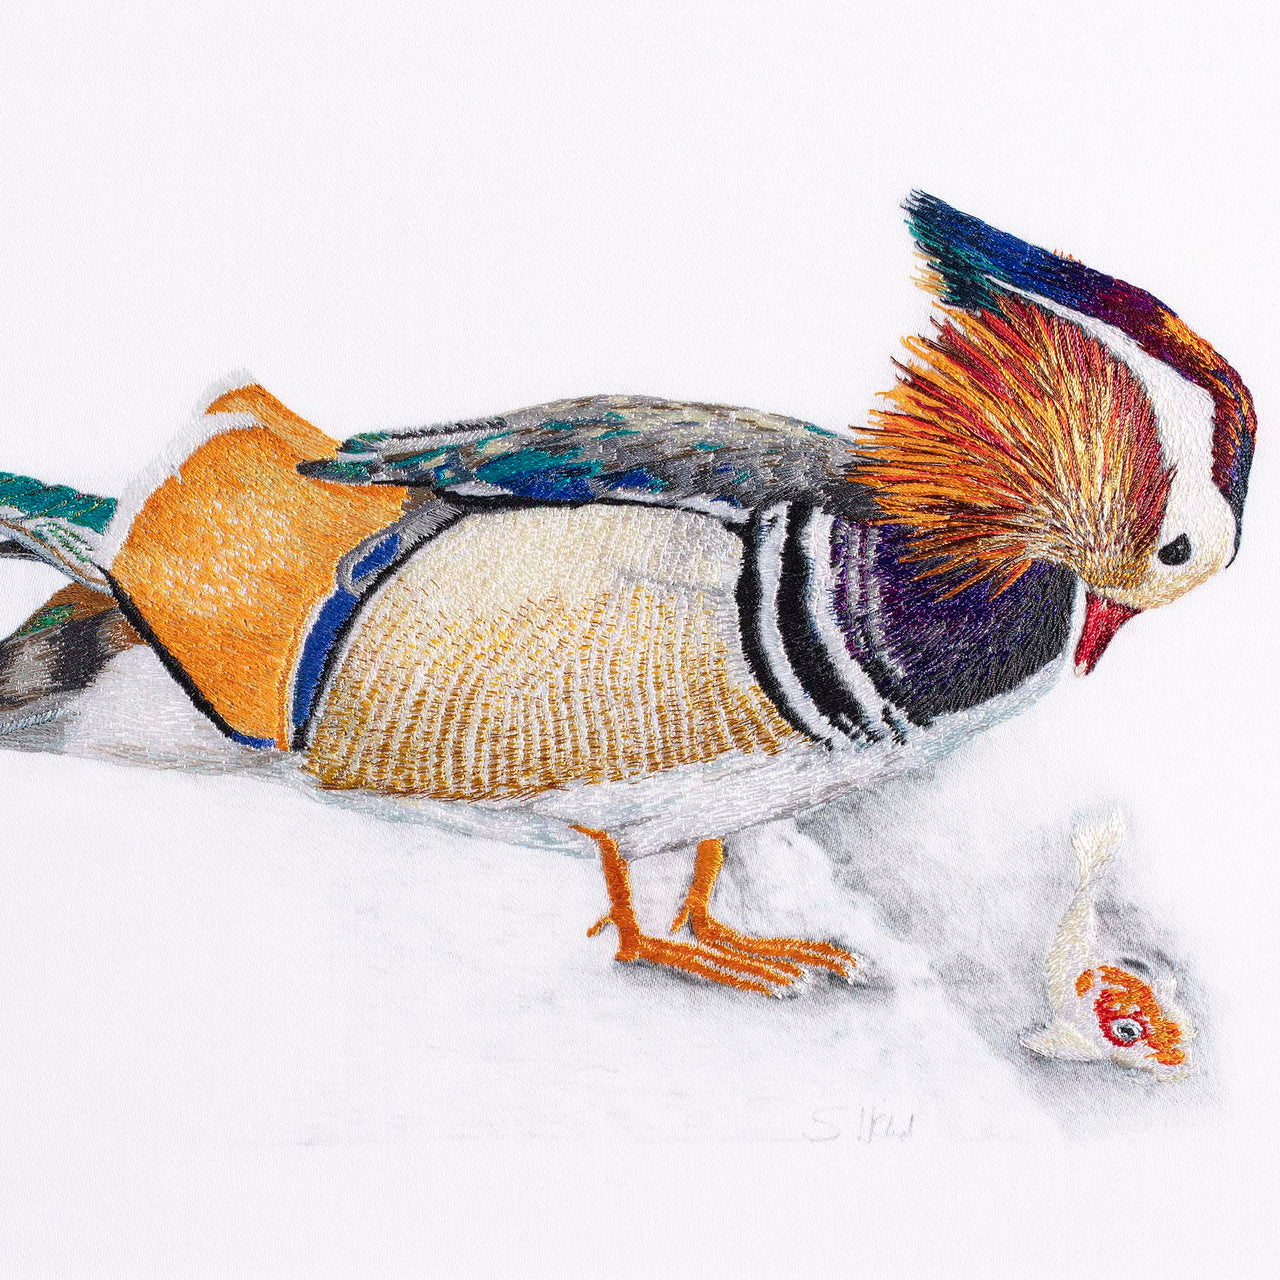 Mandarin duck hand embroidered limited edition print